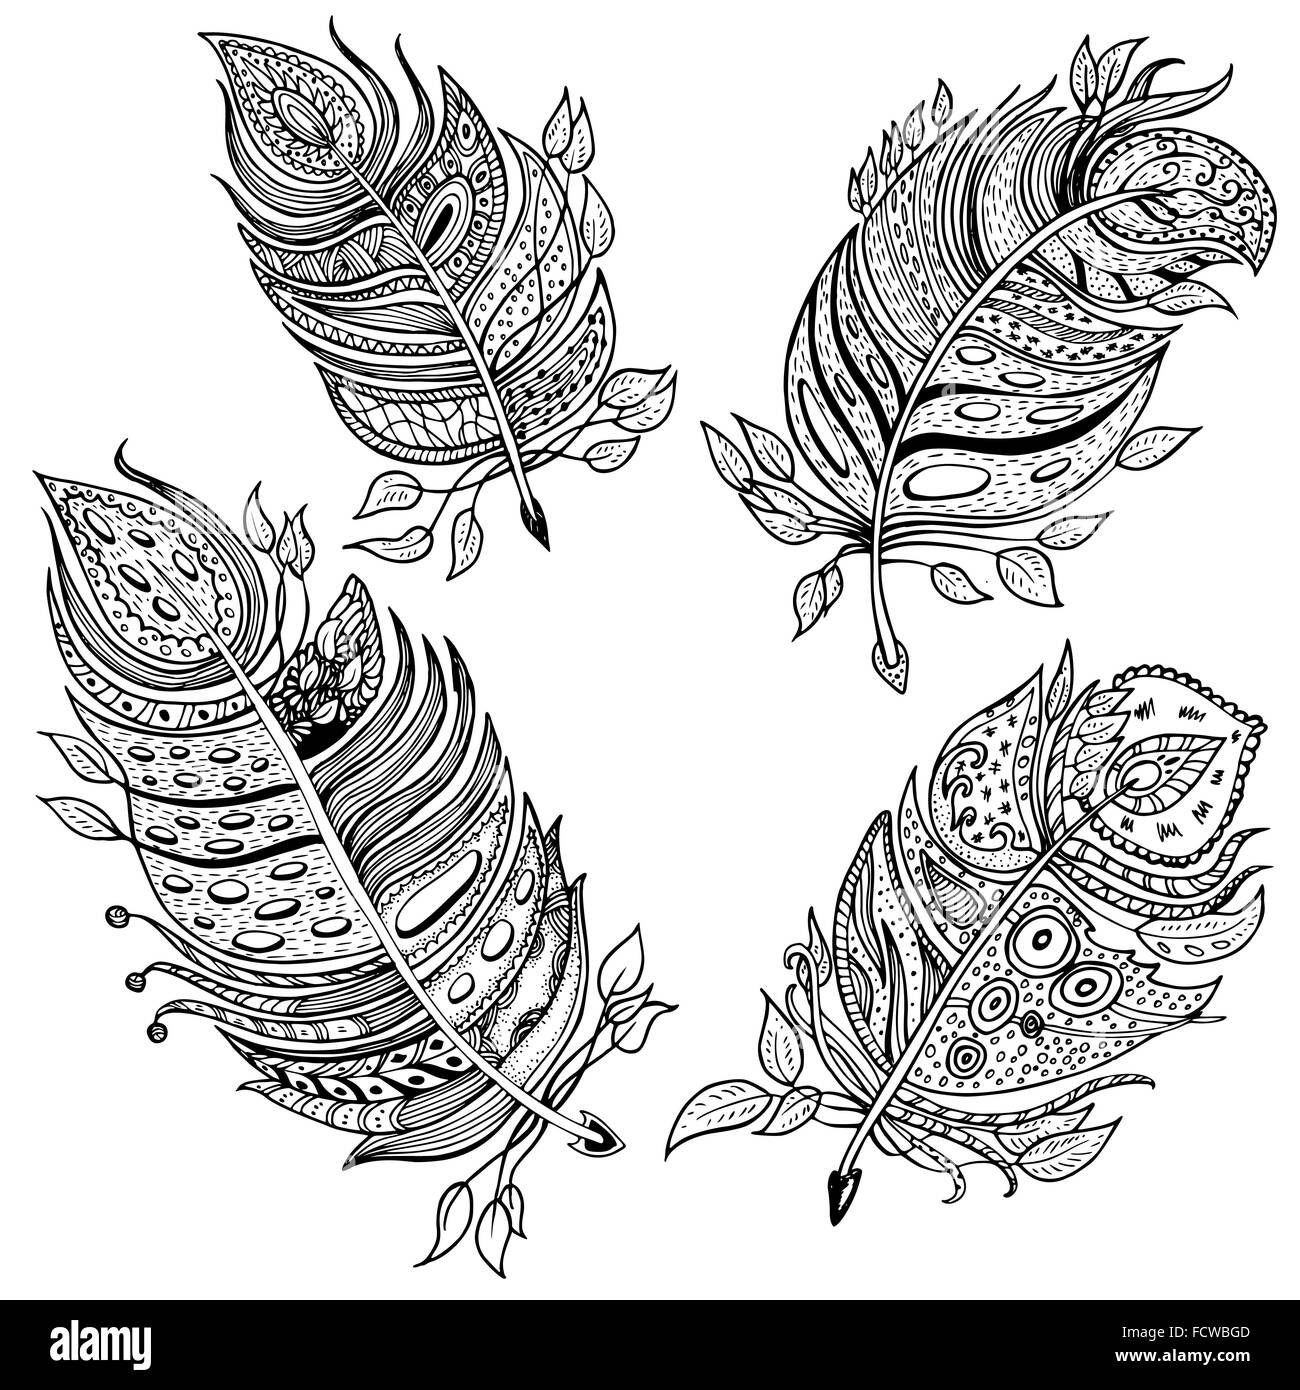 set of 4 hand drawn line art of single feathers with ornaments in zentangle style. unique vector illustration, black and white c Stock Vector